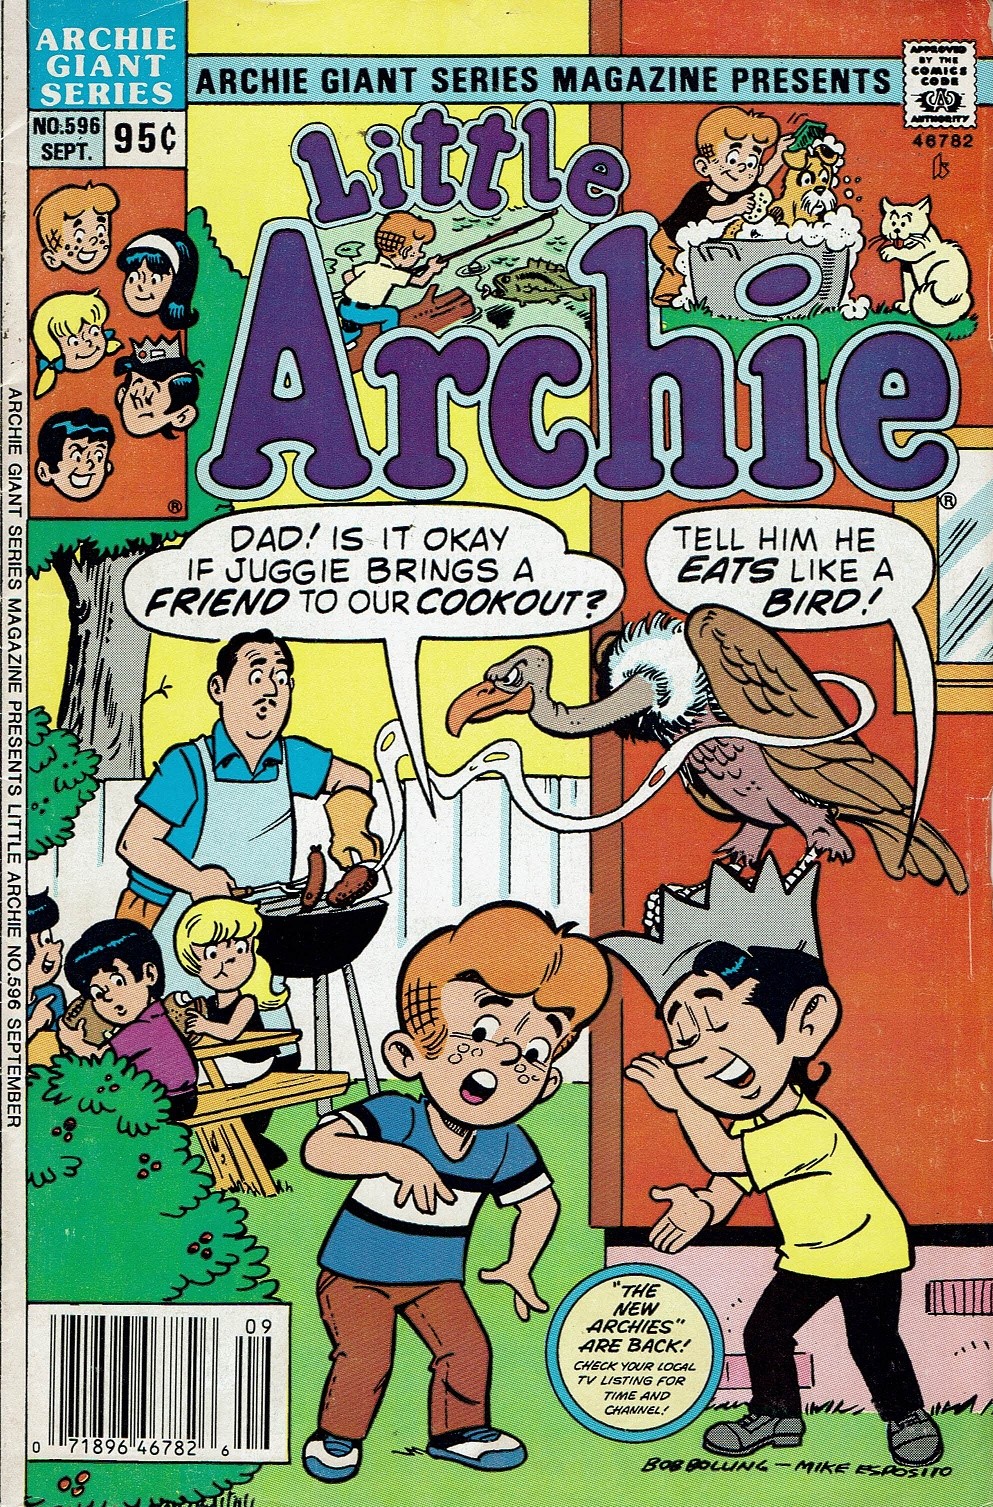 Archie Giant Series Magazine 596 Page 1